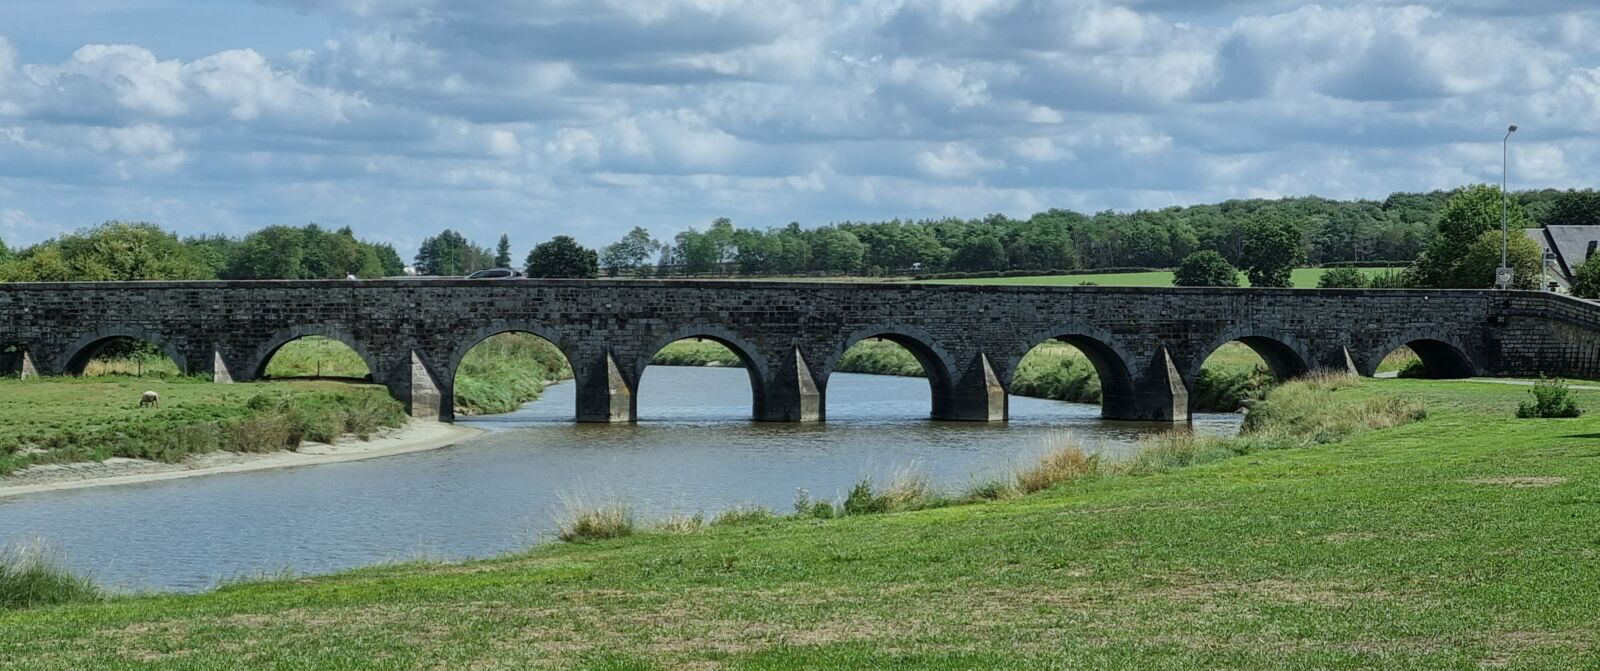 Arched bridge over water